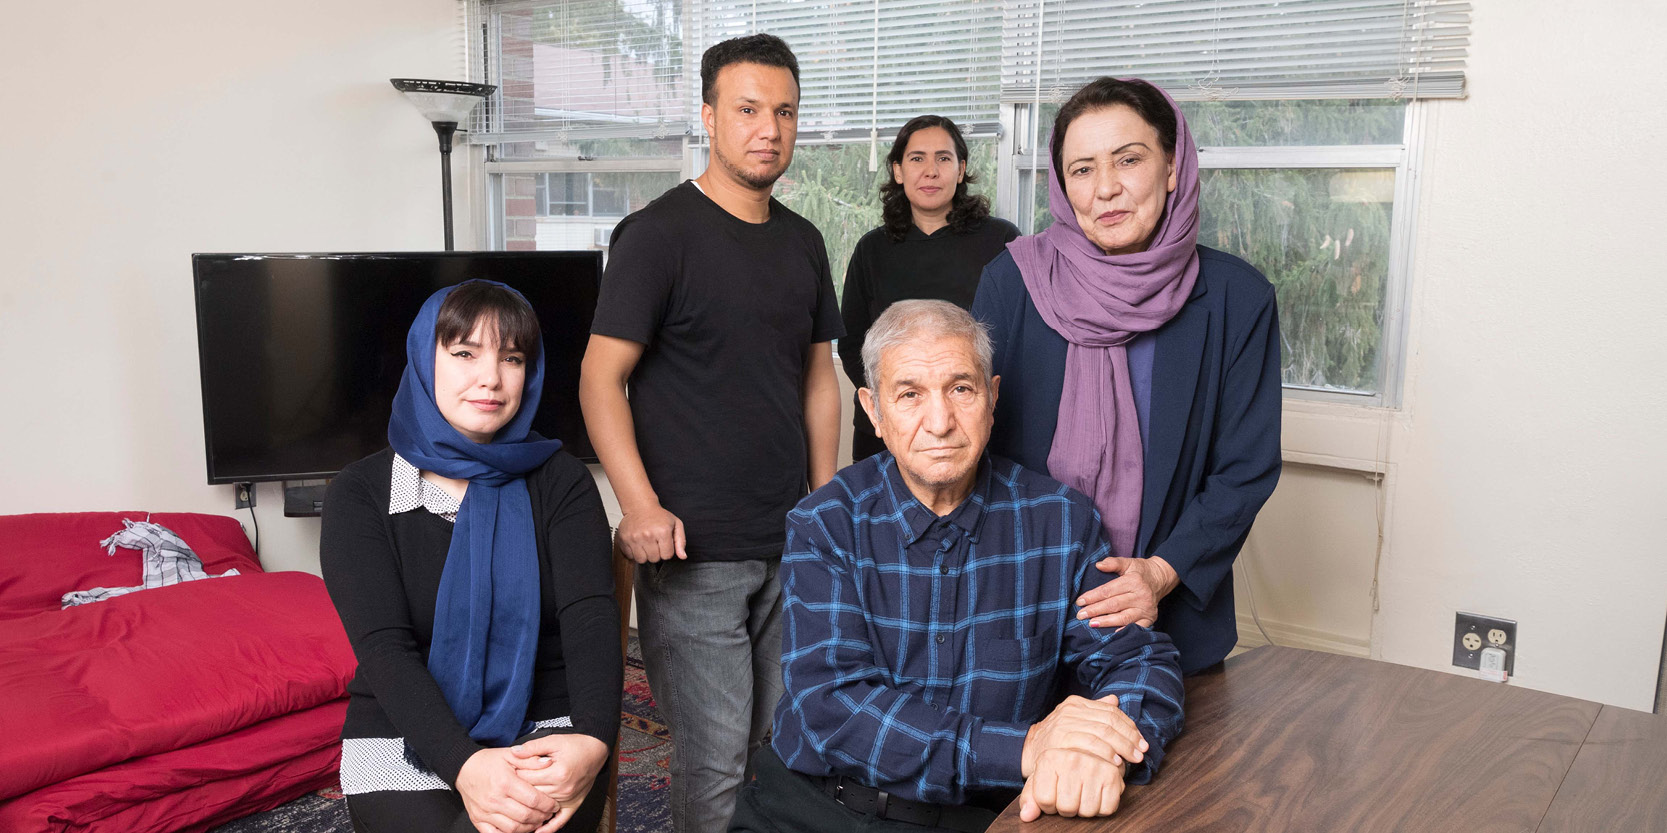 Mariam’s sister Fahima, brother Razeq, father Hayatuallah and mother Hameeda fled Afghanistan in August and are starting over in West Lafayette with support from the Purdue and Greater Lafayette communities.